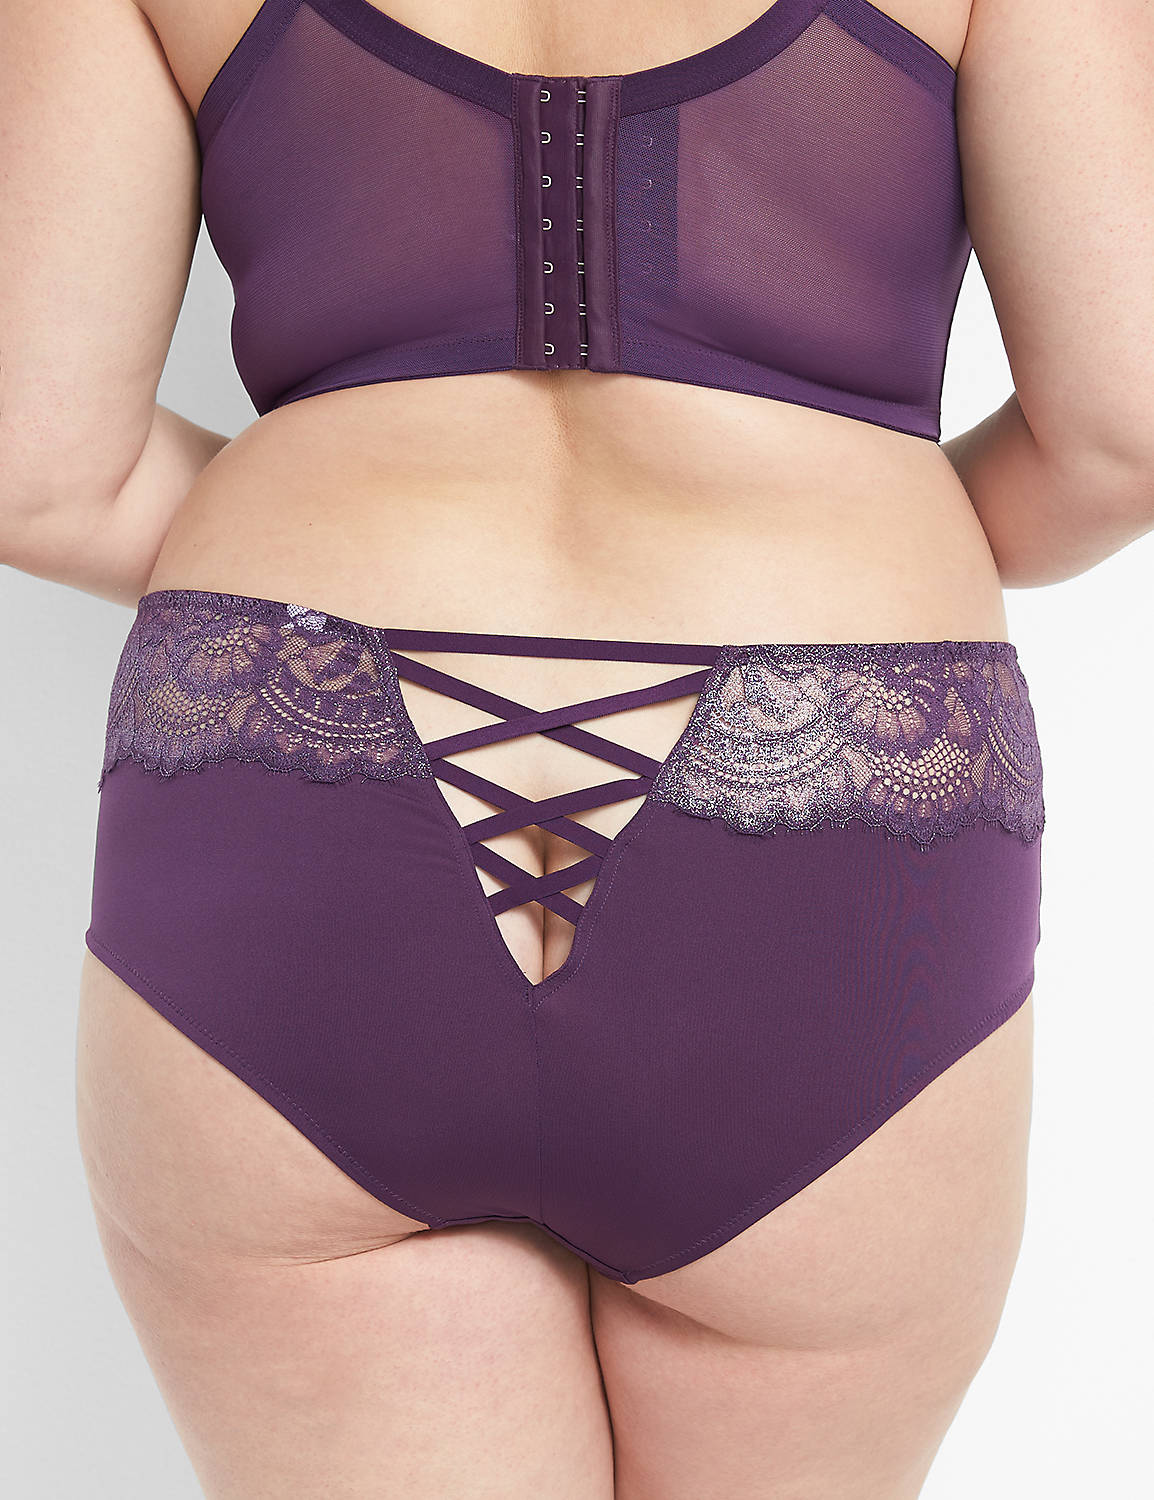 Lane Bryant Cacique Strappy Mid Waist Cheeky Panties Underwear Purple Lace 18 20